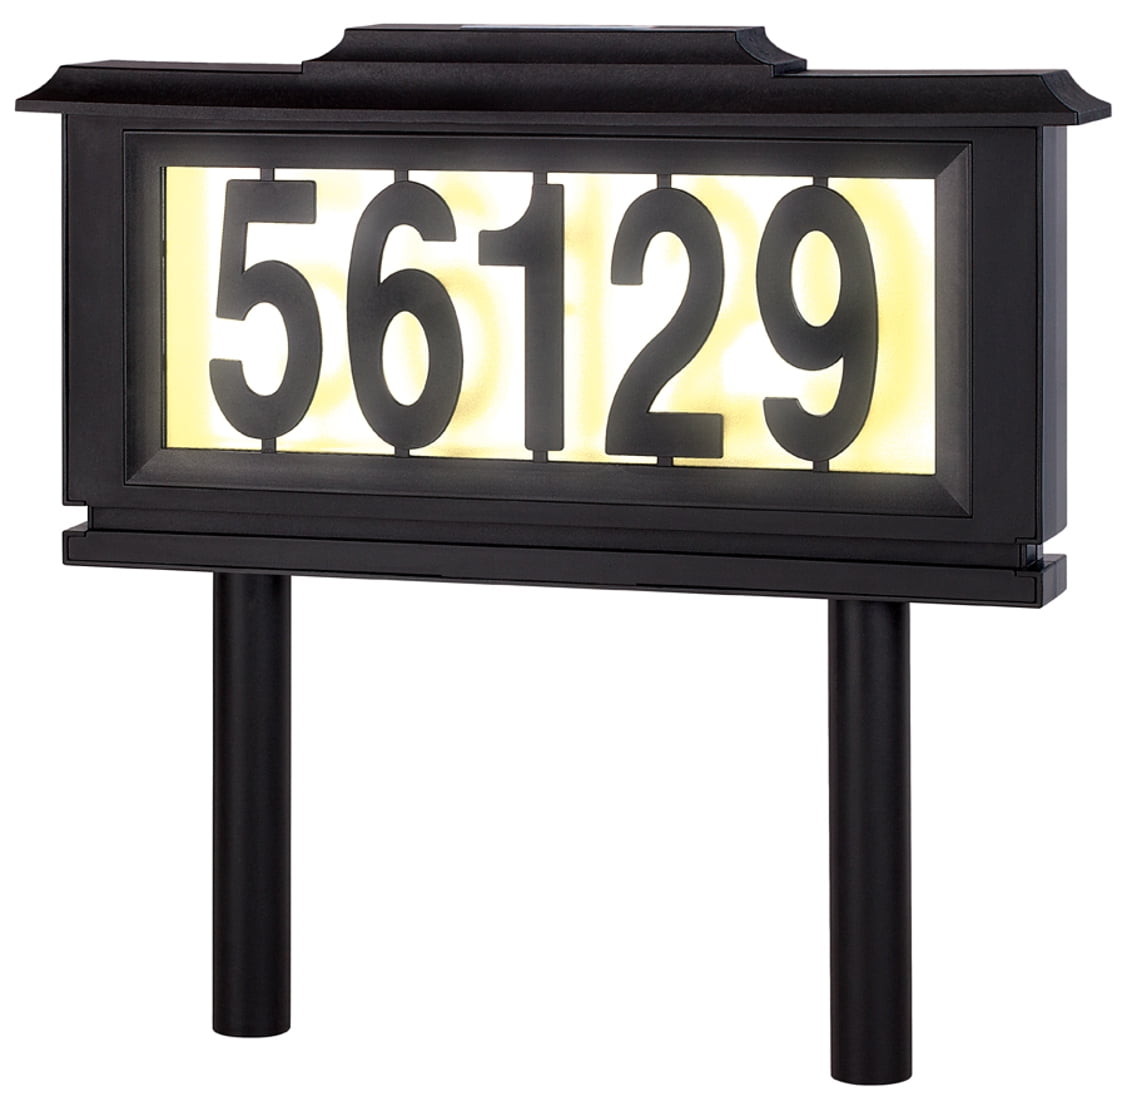 Number Address Plaque Outdoor Led Light, Outdoor Lighted House Numbers